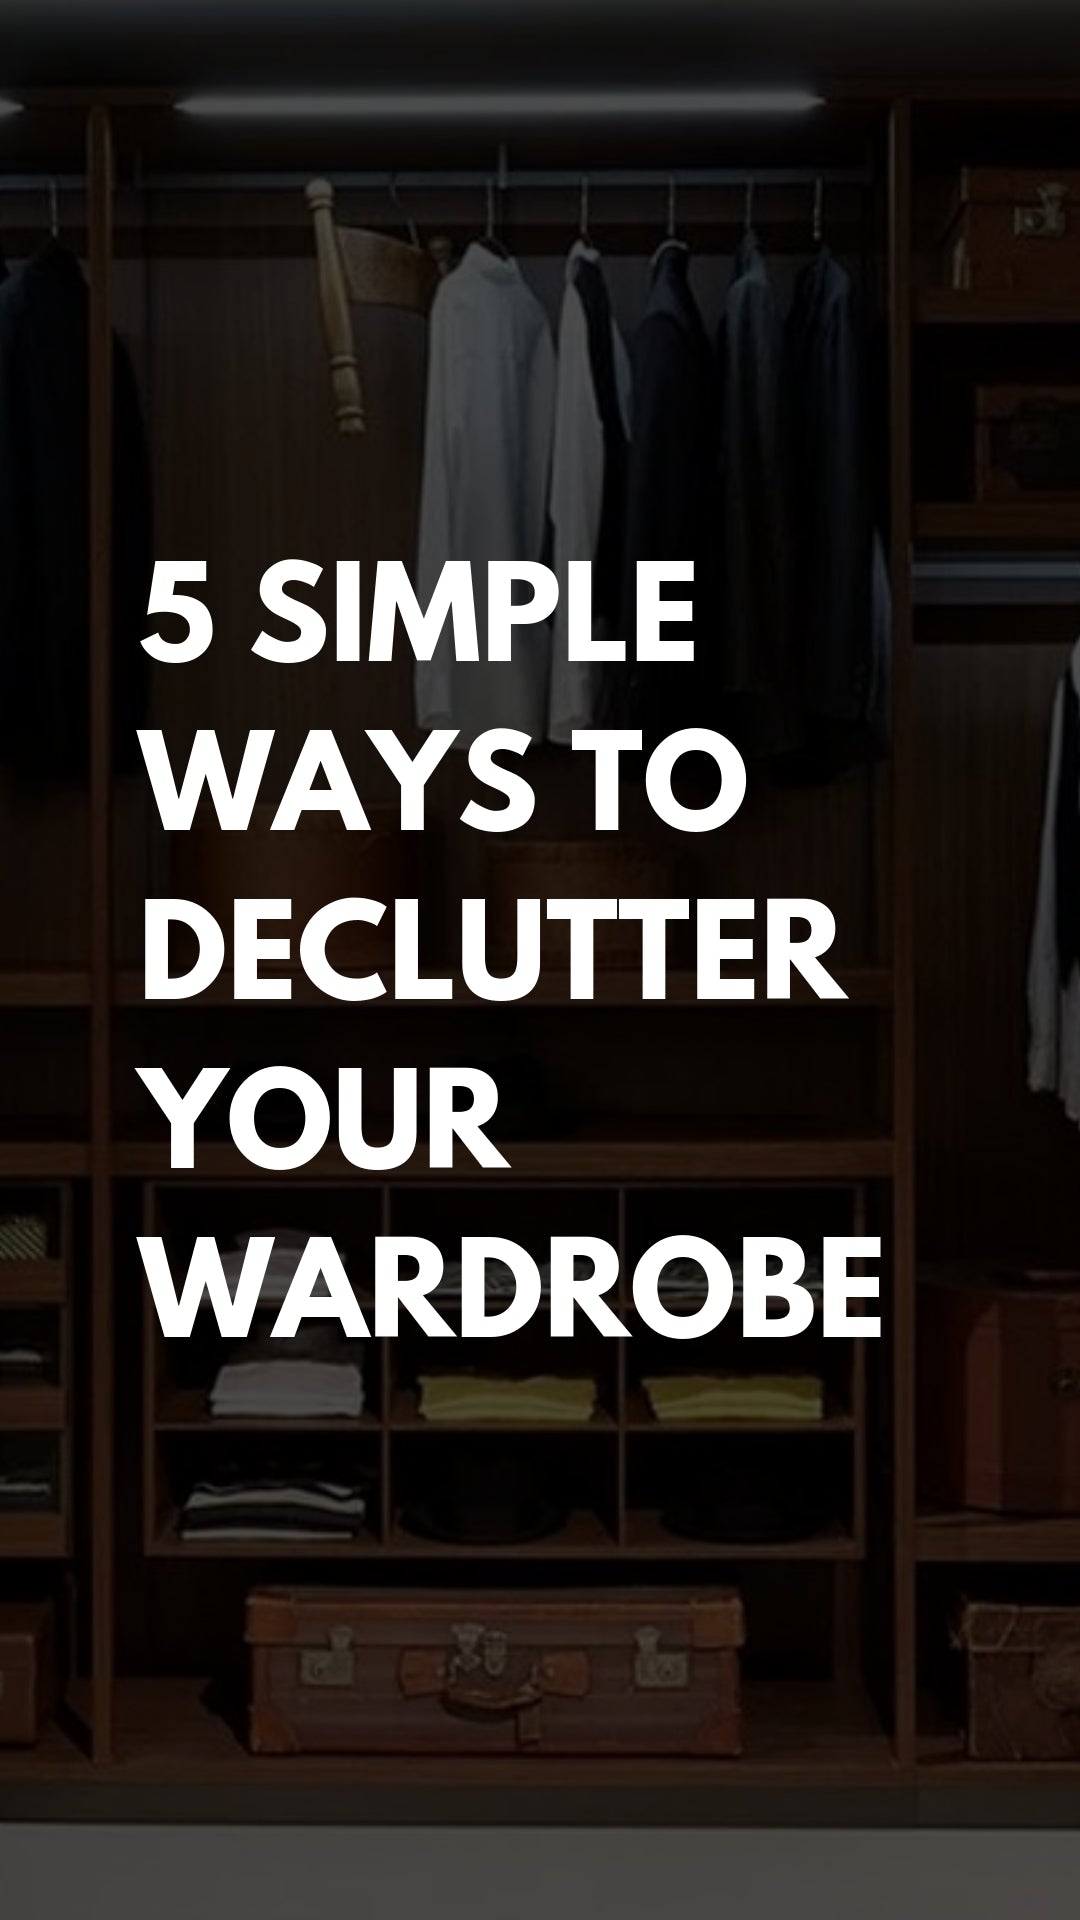 5 Simple Ways to Declutter Your Wardrobe